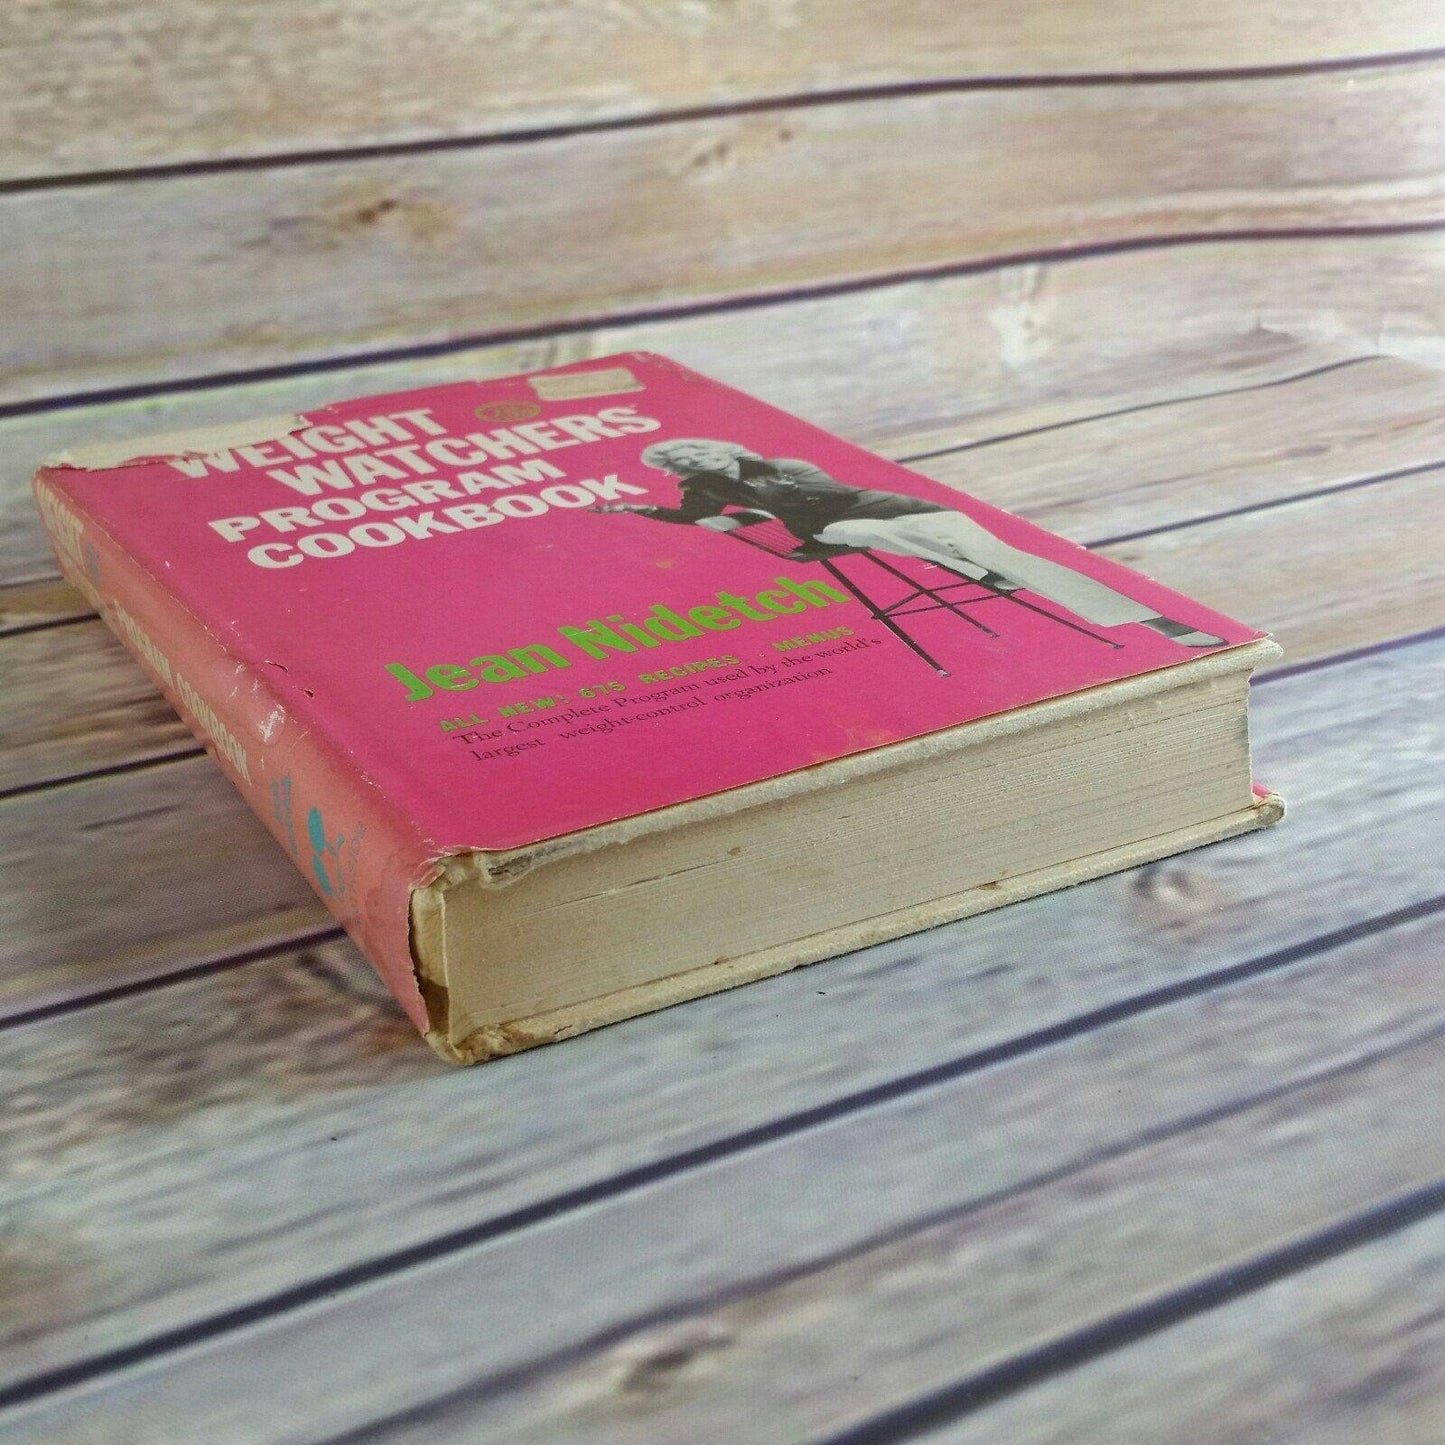 Vintage Cookbook Weight Watchers Program 1973 Pink Hardcover With Dust Jacket Jean Nidetch